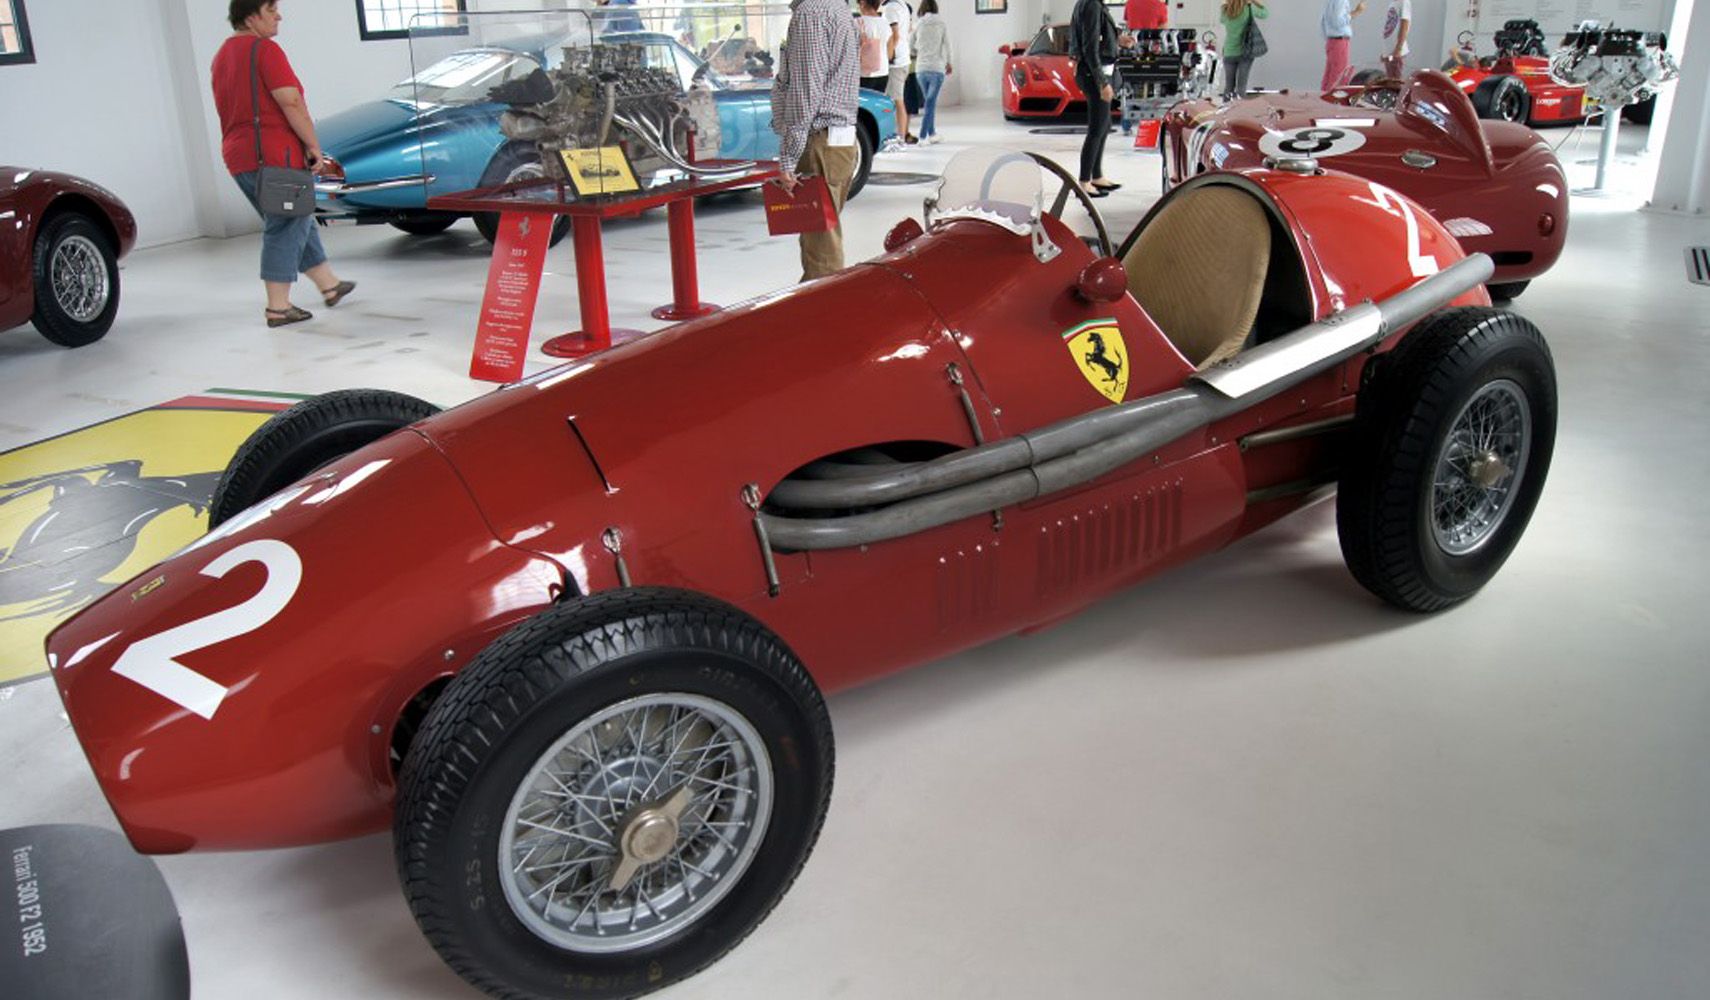 The Ferrari 500 Is The Tribe’s Elder, The Pride’s Leader That Started Ferrari And Scuderia Ferrari Take Many World Championship Titles As If They Were Rightfully Theirs